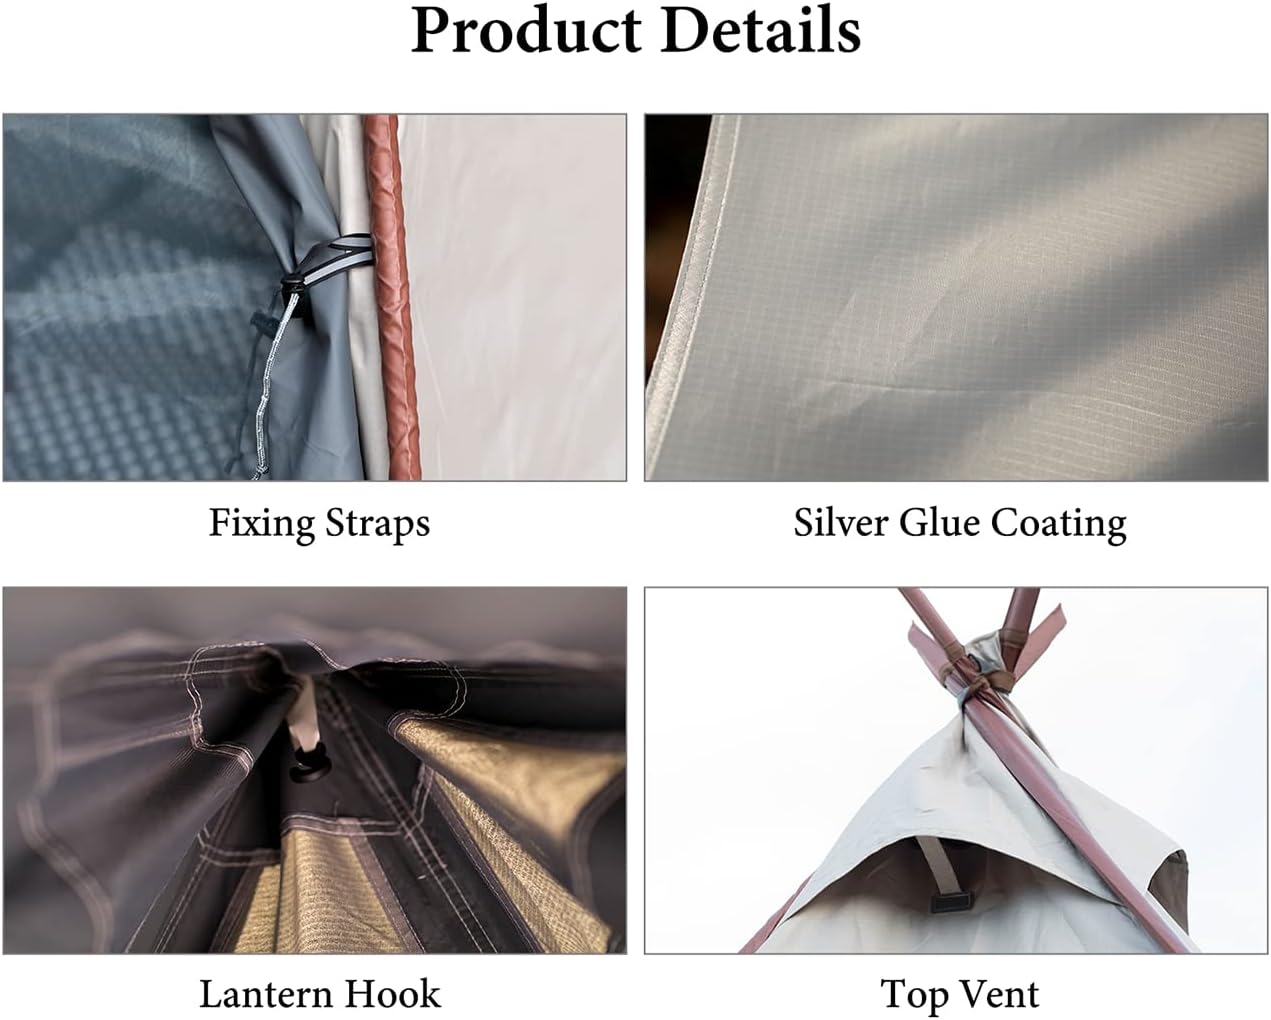 Smore Pyramid Tent For 3 Waterproof Details